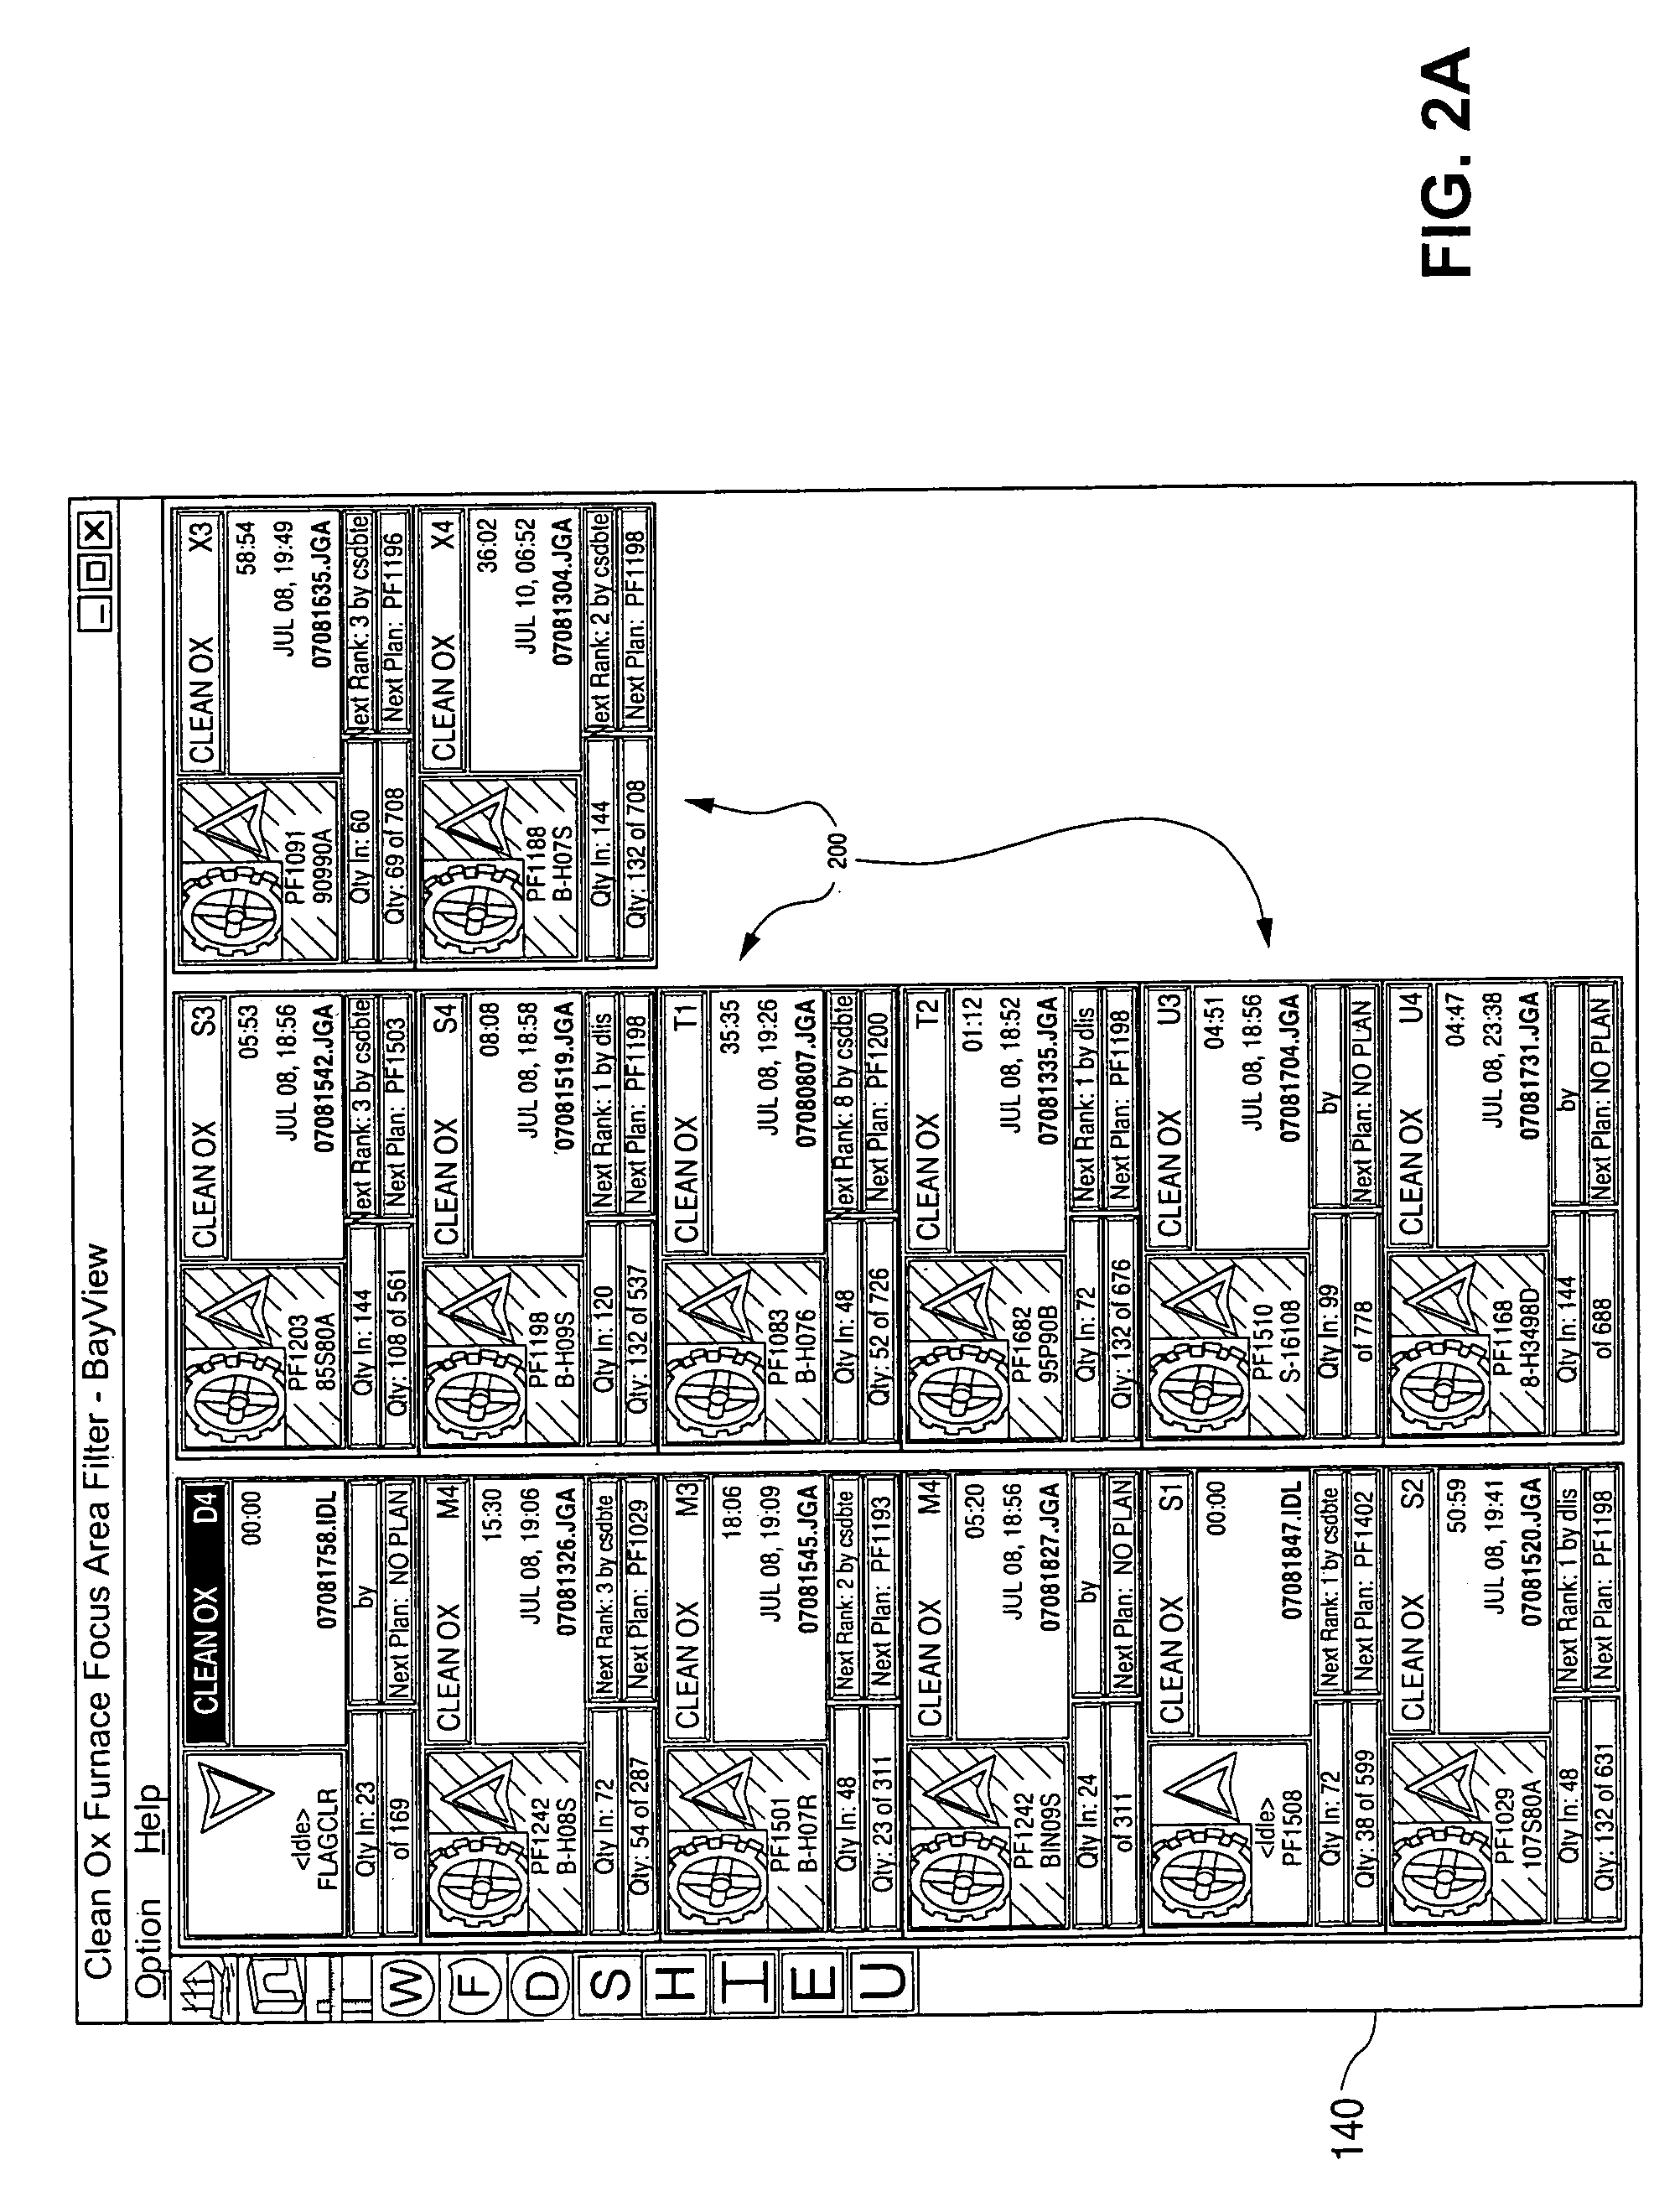 Graphical user interface for compliance monitoring in semiconductor wafer fabrication and method of operation